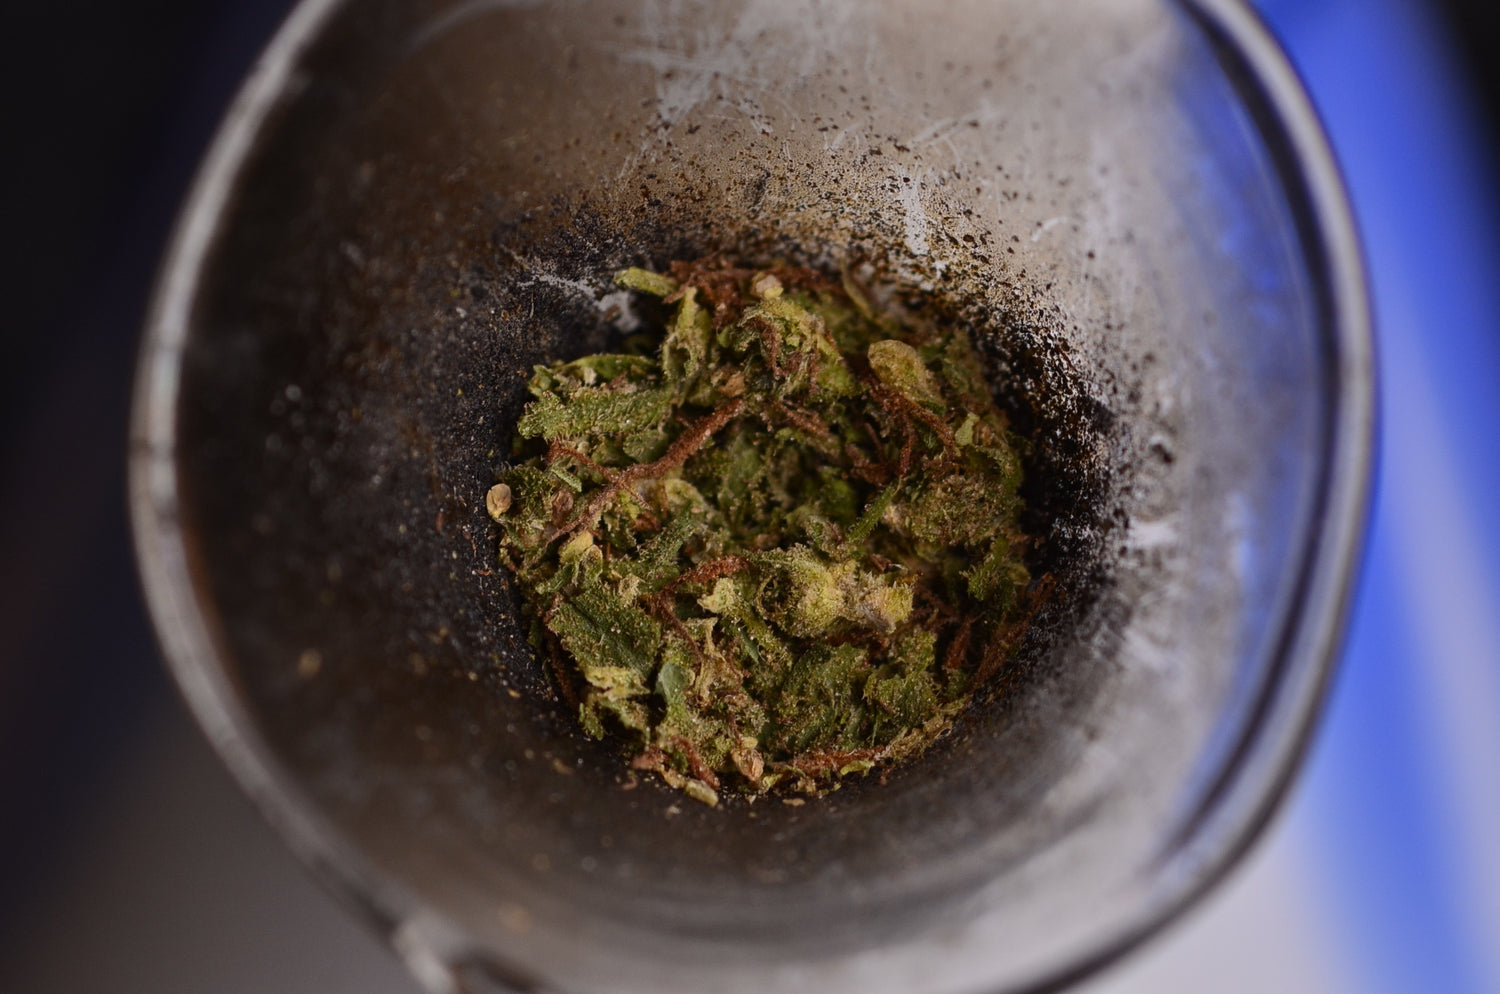 11 ways to use leftover cannabis pulp